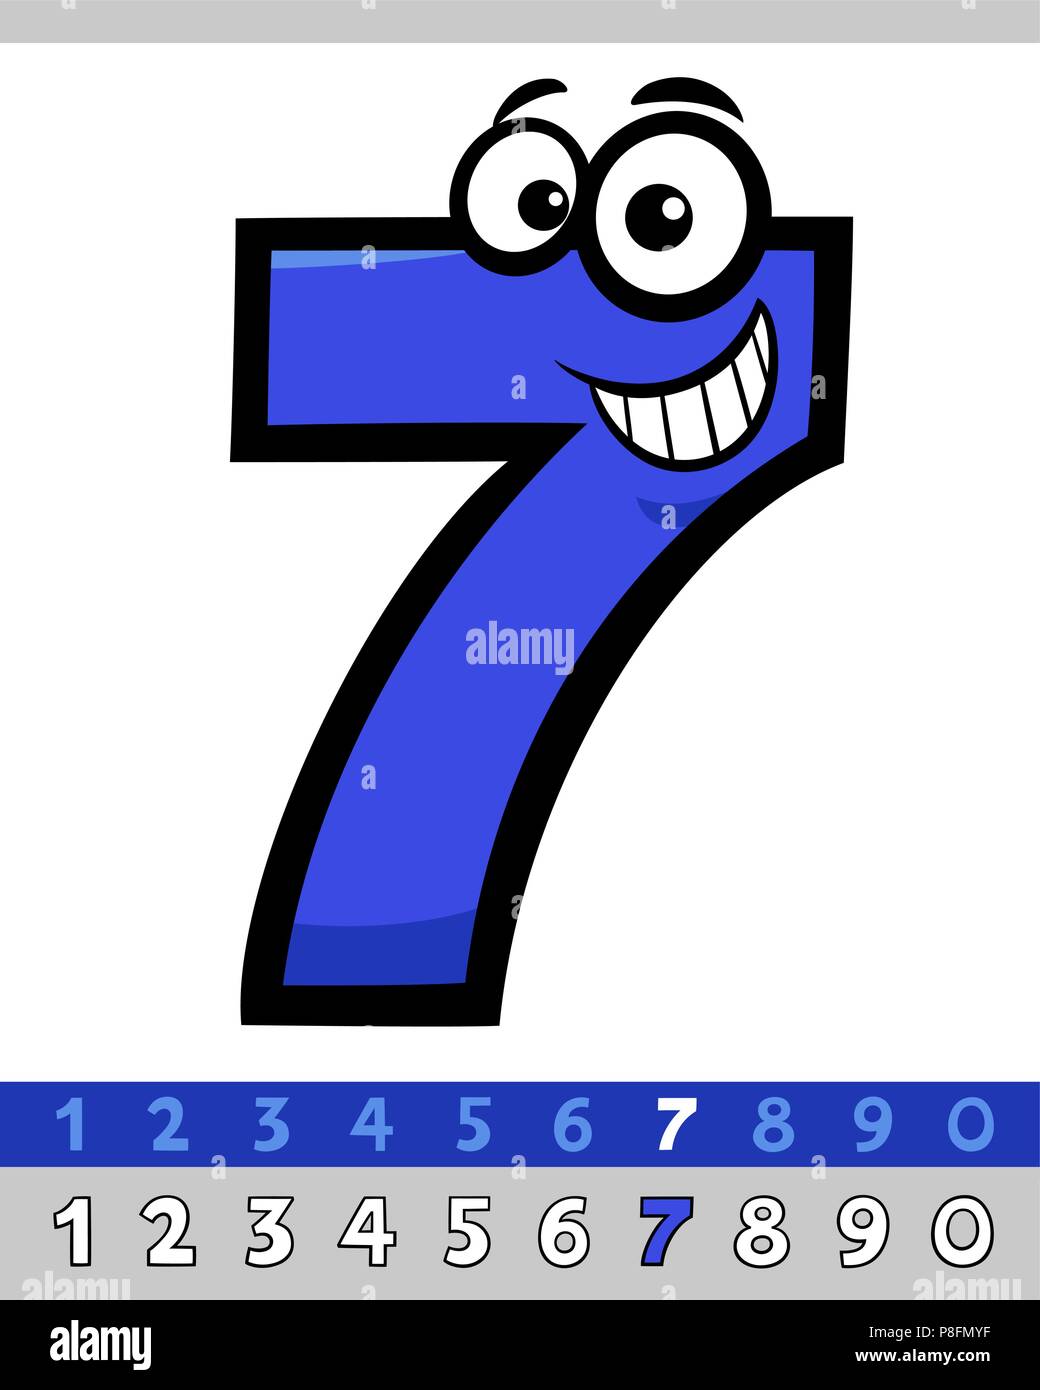 Cartoon Illustrations of Seven Basic Number Character Educational Collection Stock Vector